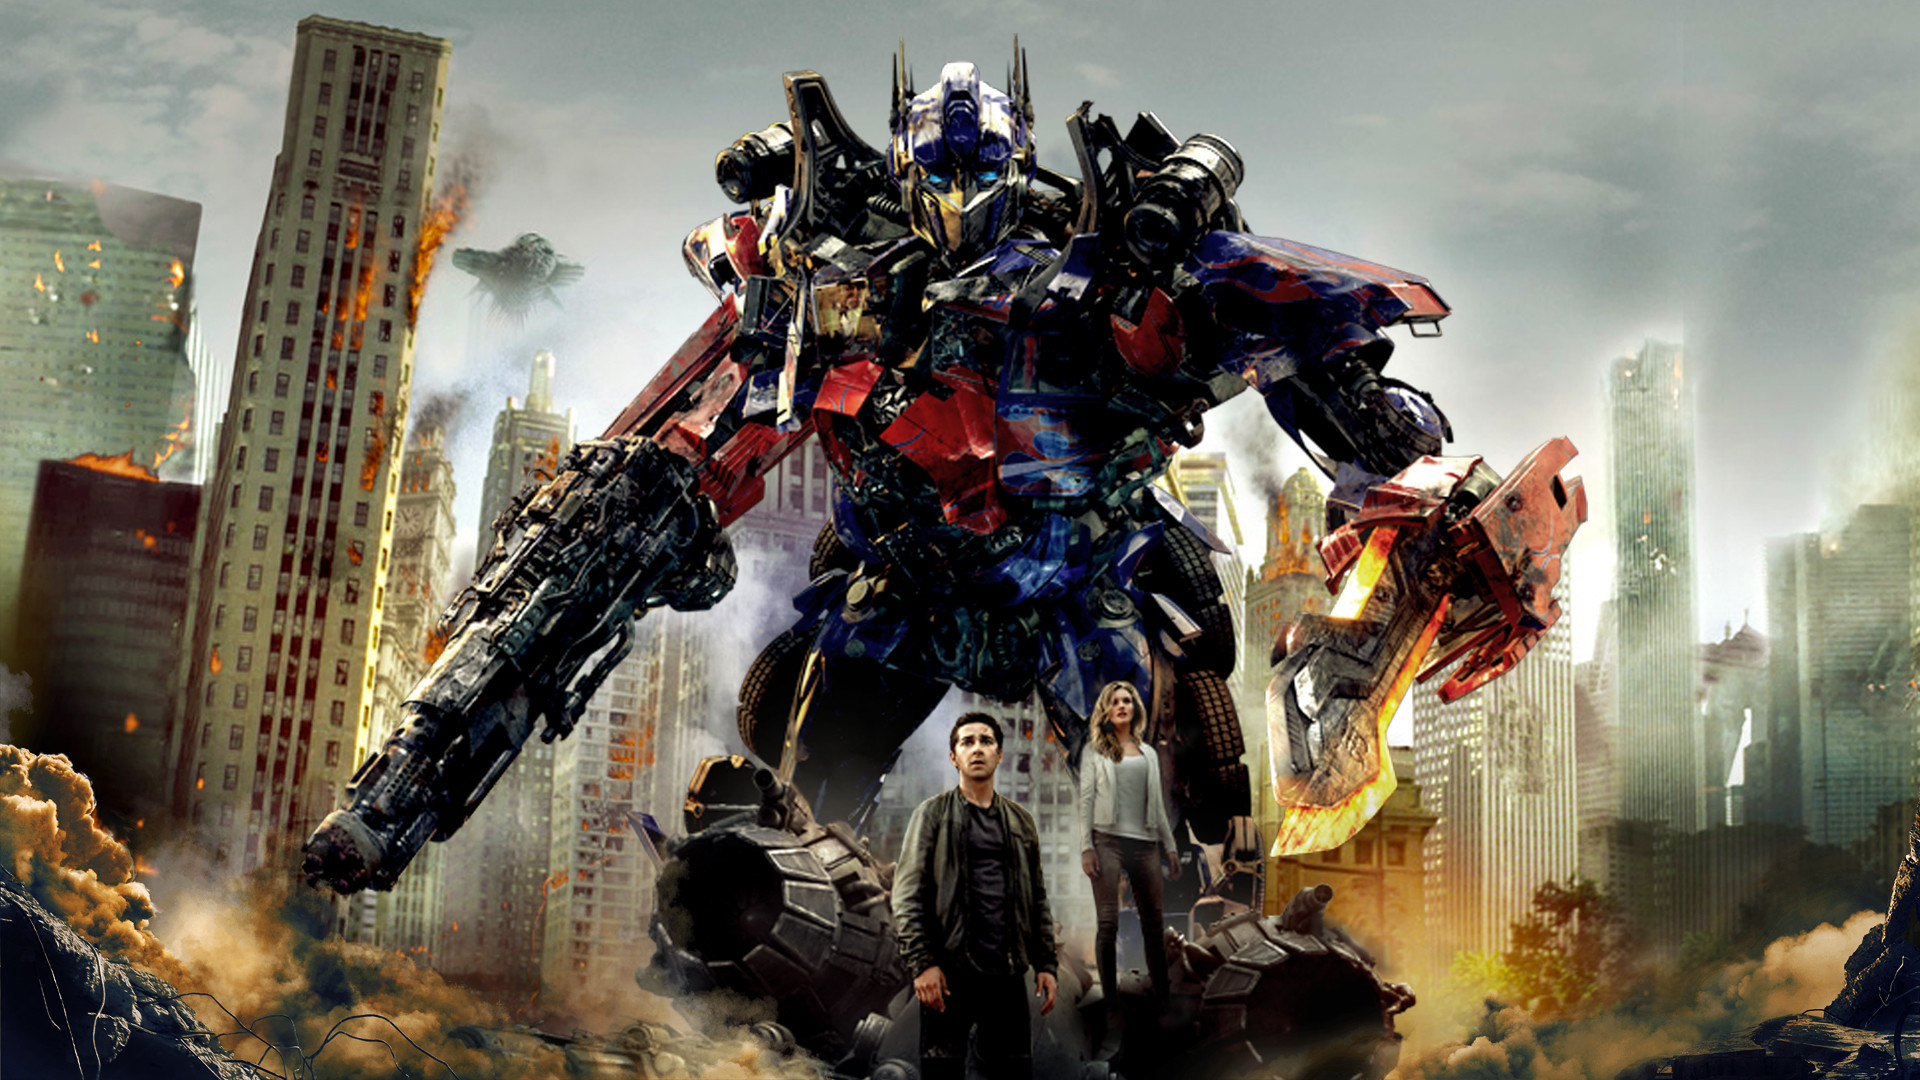 1920x1080 Download Optimus Prime Dark Of The Moon Wallpaper Images #xgnby .